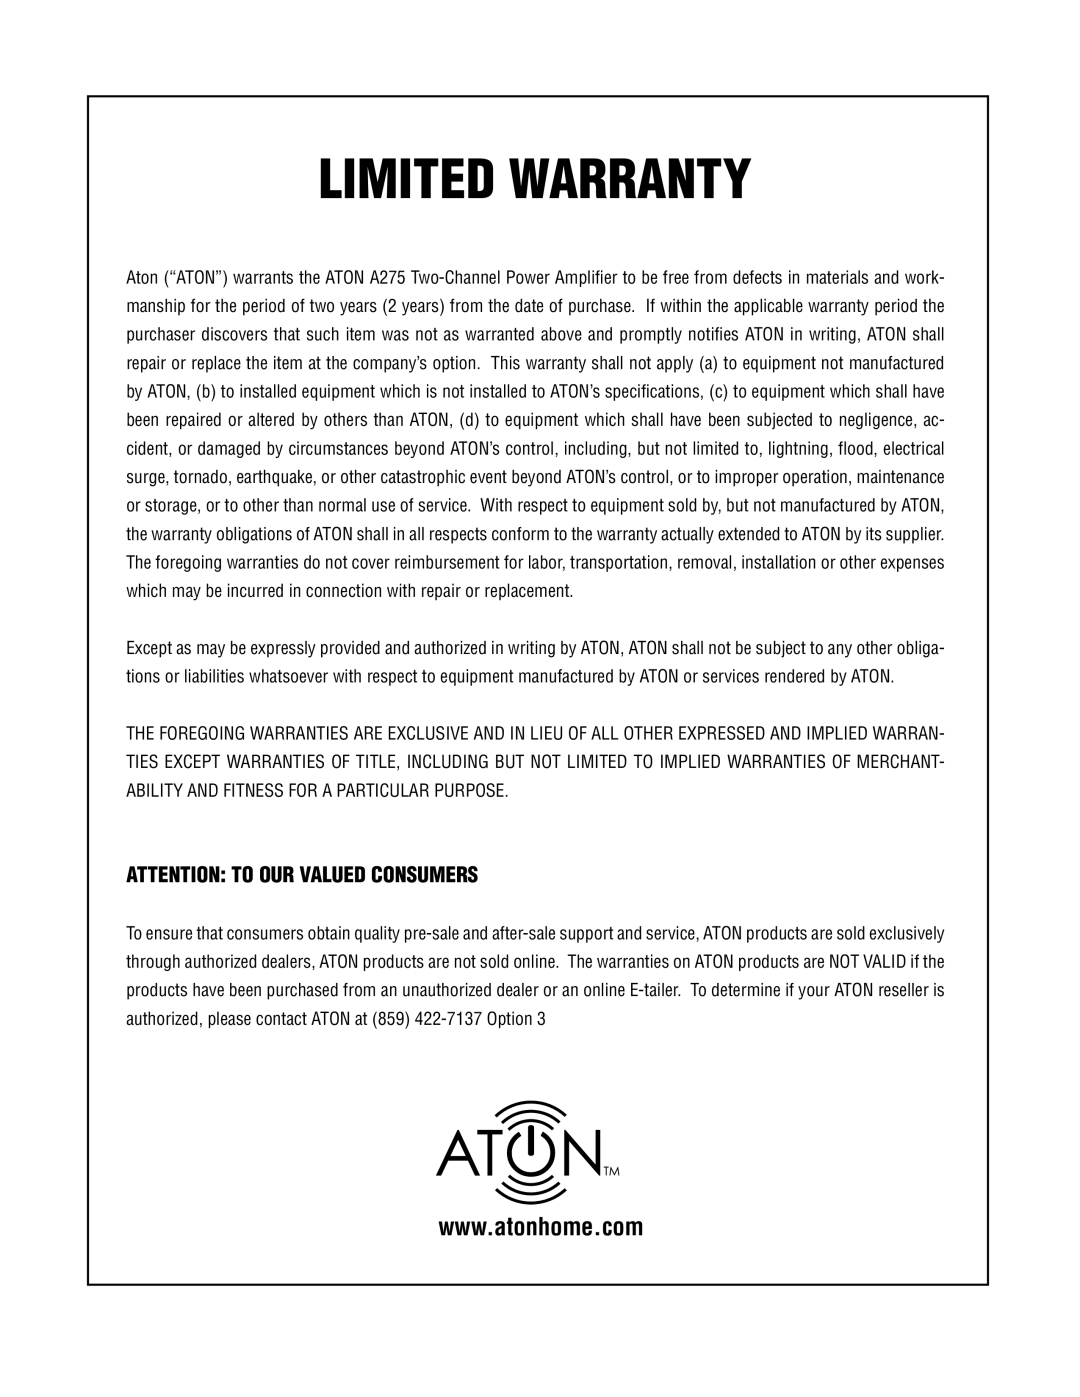 ATON A275 installation manual Limited Warranty, Attention To Our Valued Consumers 